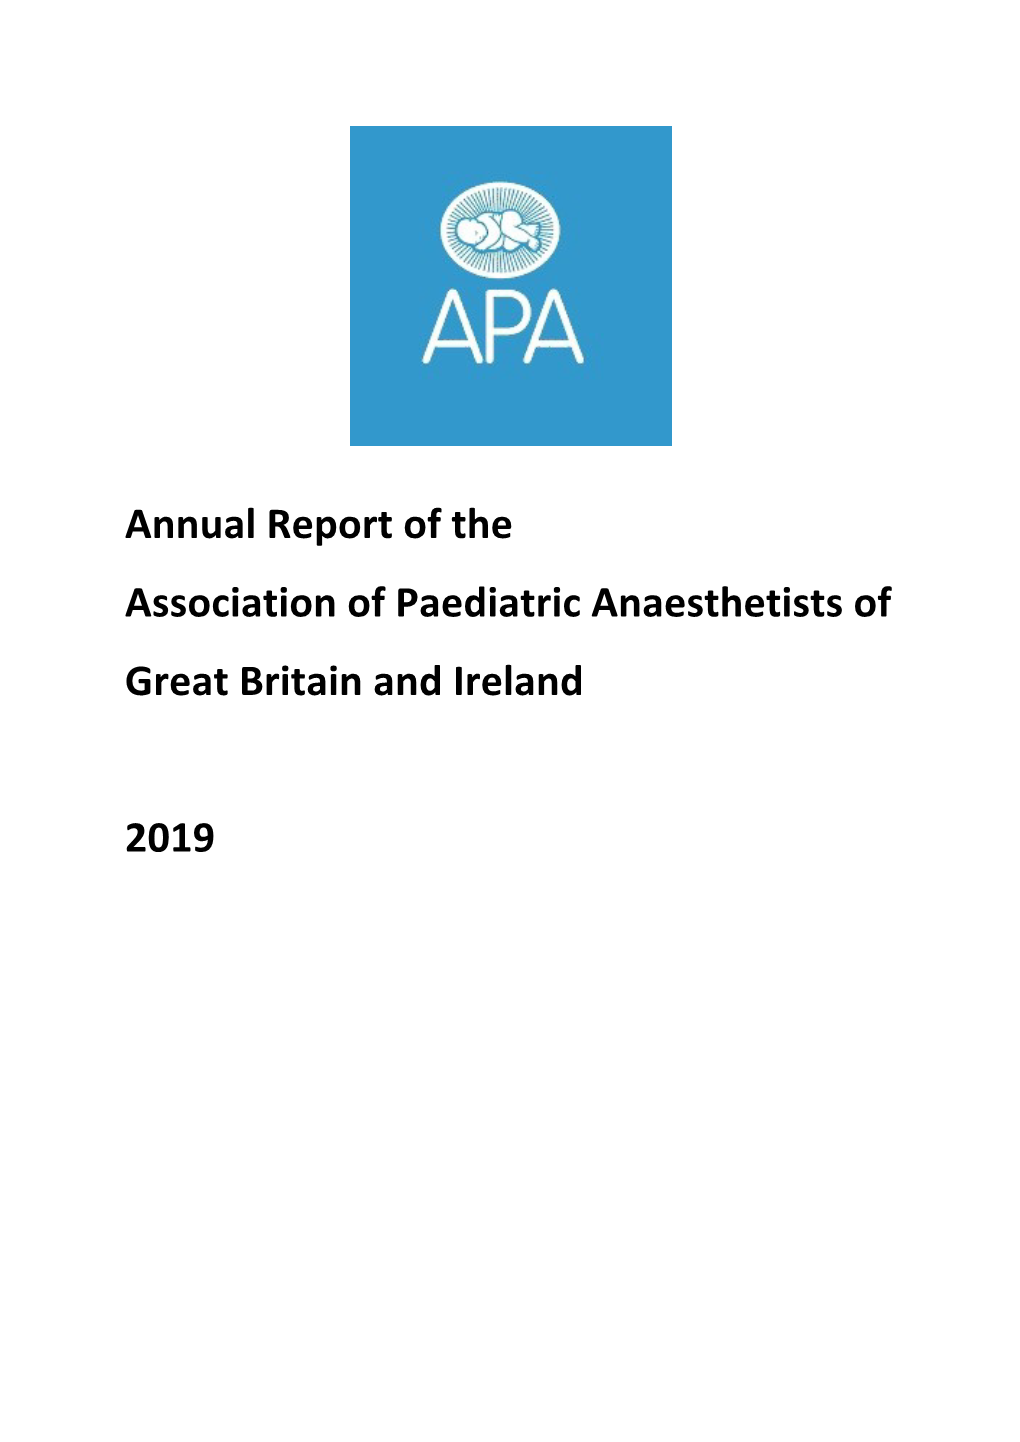 Annual Report of the Association of Paediatric Anaesthetists of Great Britain and Ireland